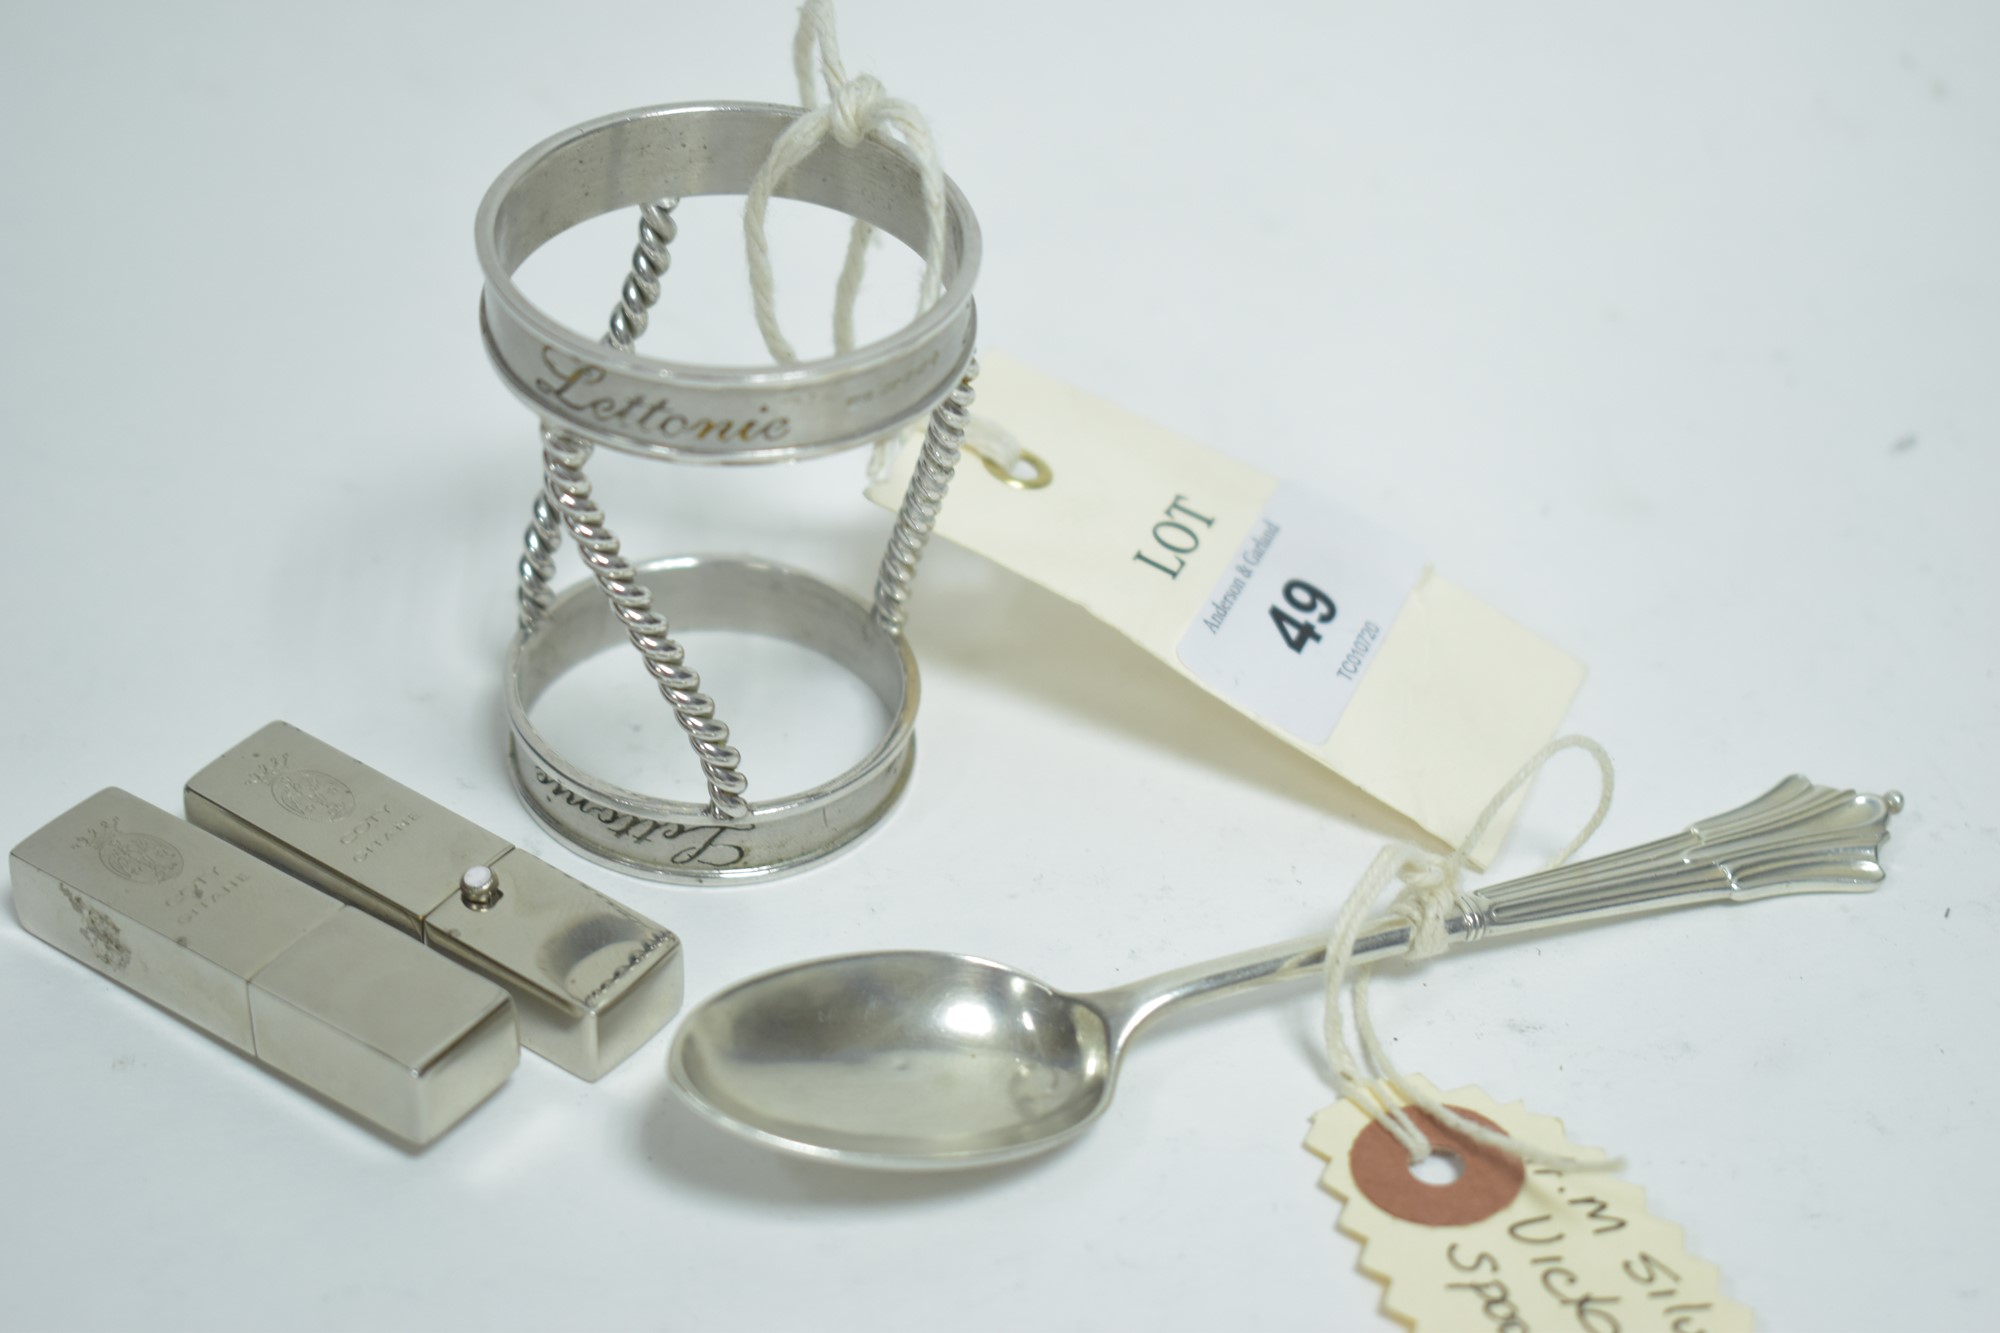 Silver egg cup / Silver spoon and metal lipstick holder